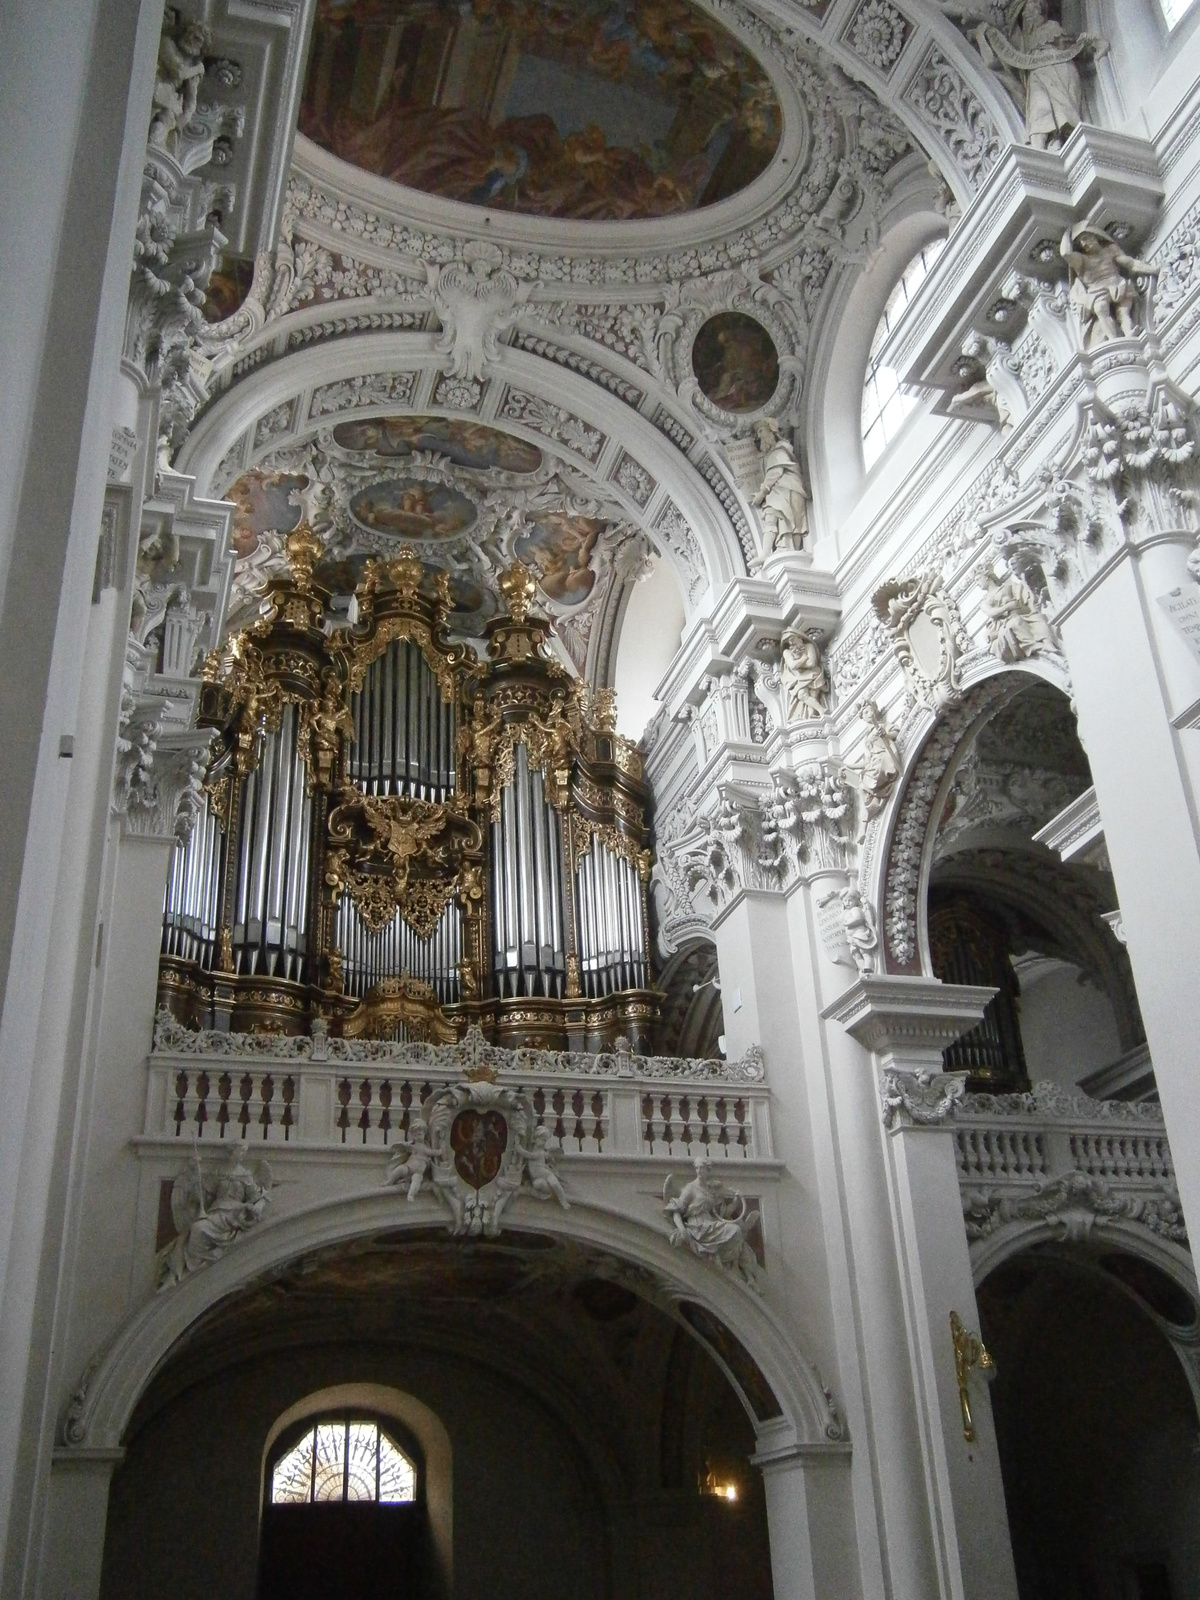 120 Day 9 Passau, organ of the Cathedral